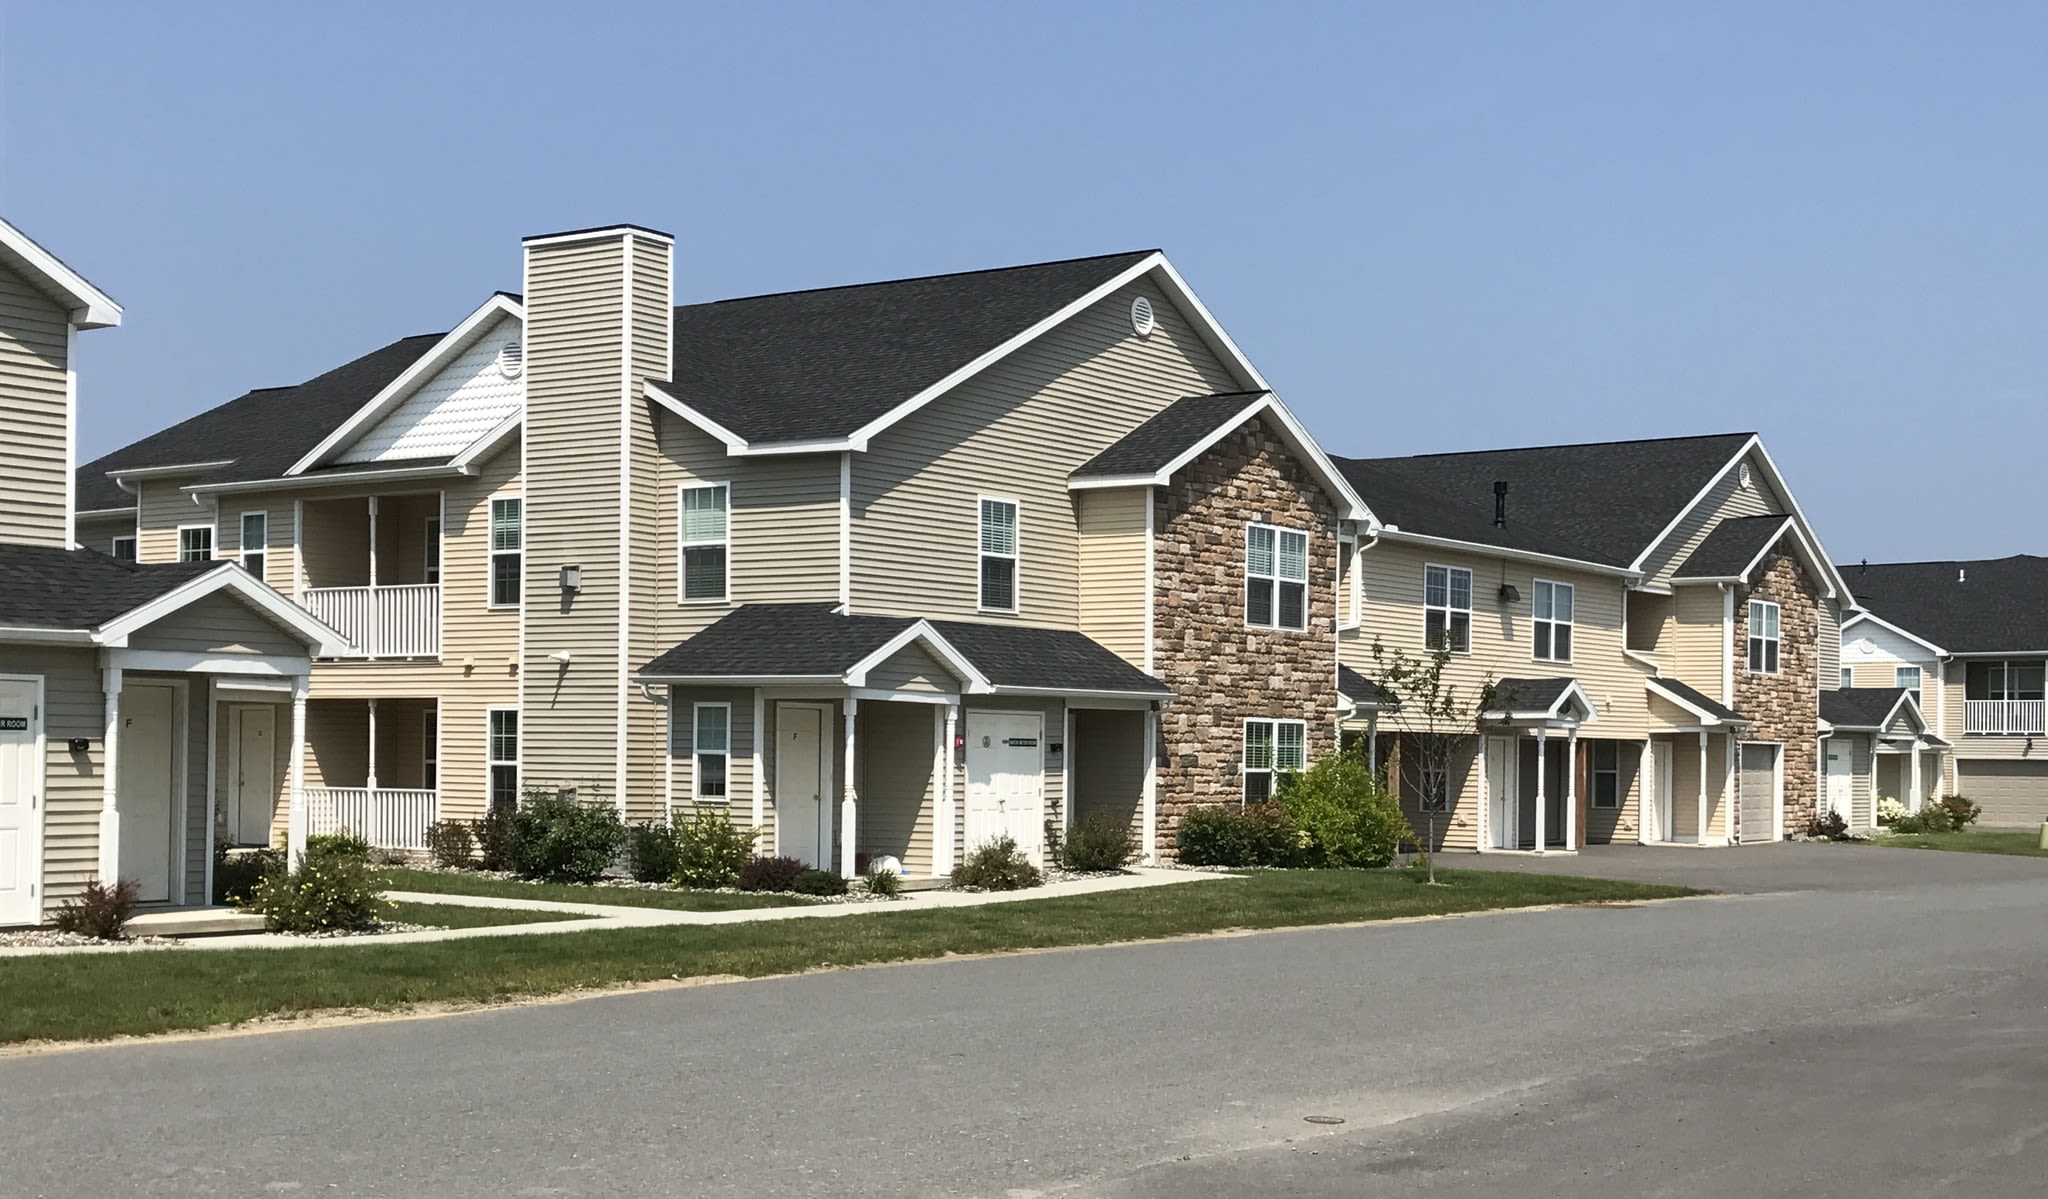 The Ridge Apartments in Troy, New York